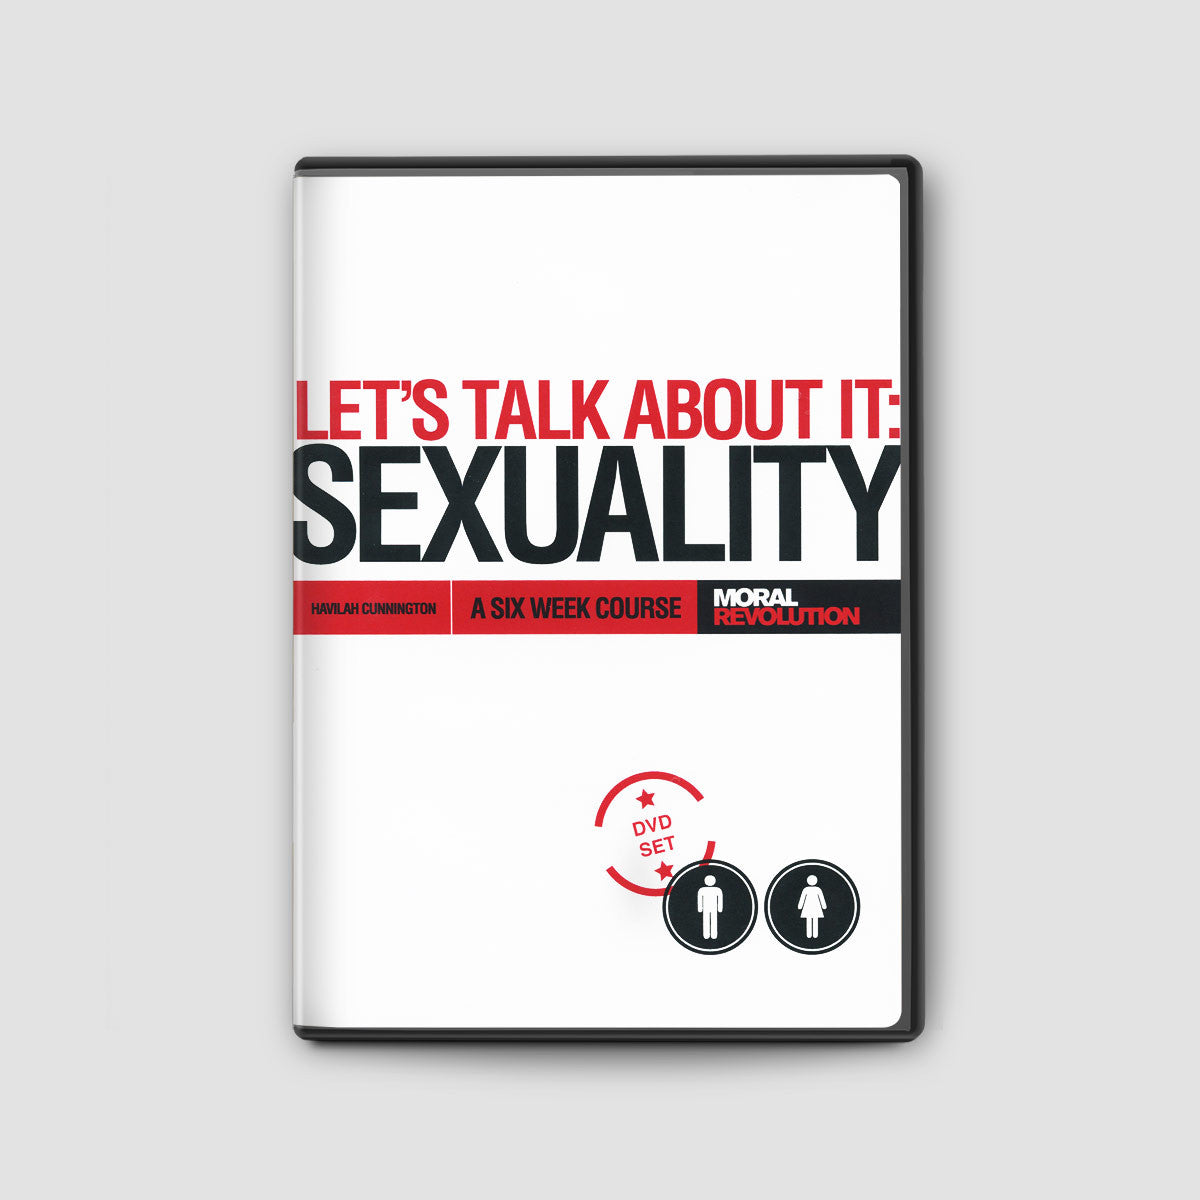 Let's Talk About It: Sexuality - 6 Week Course